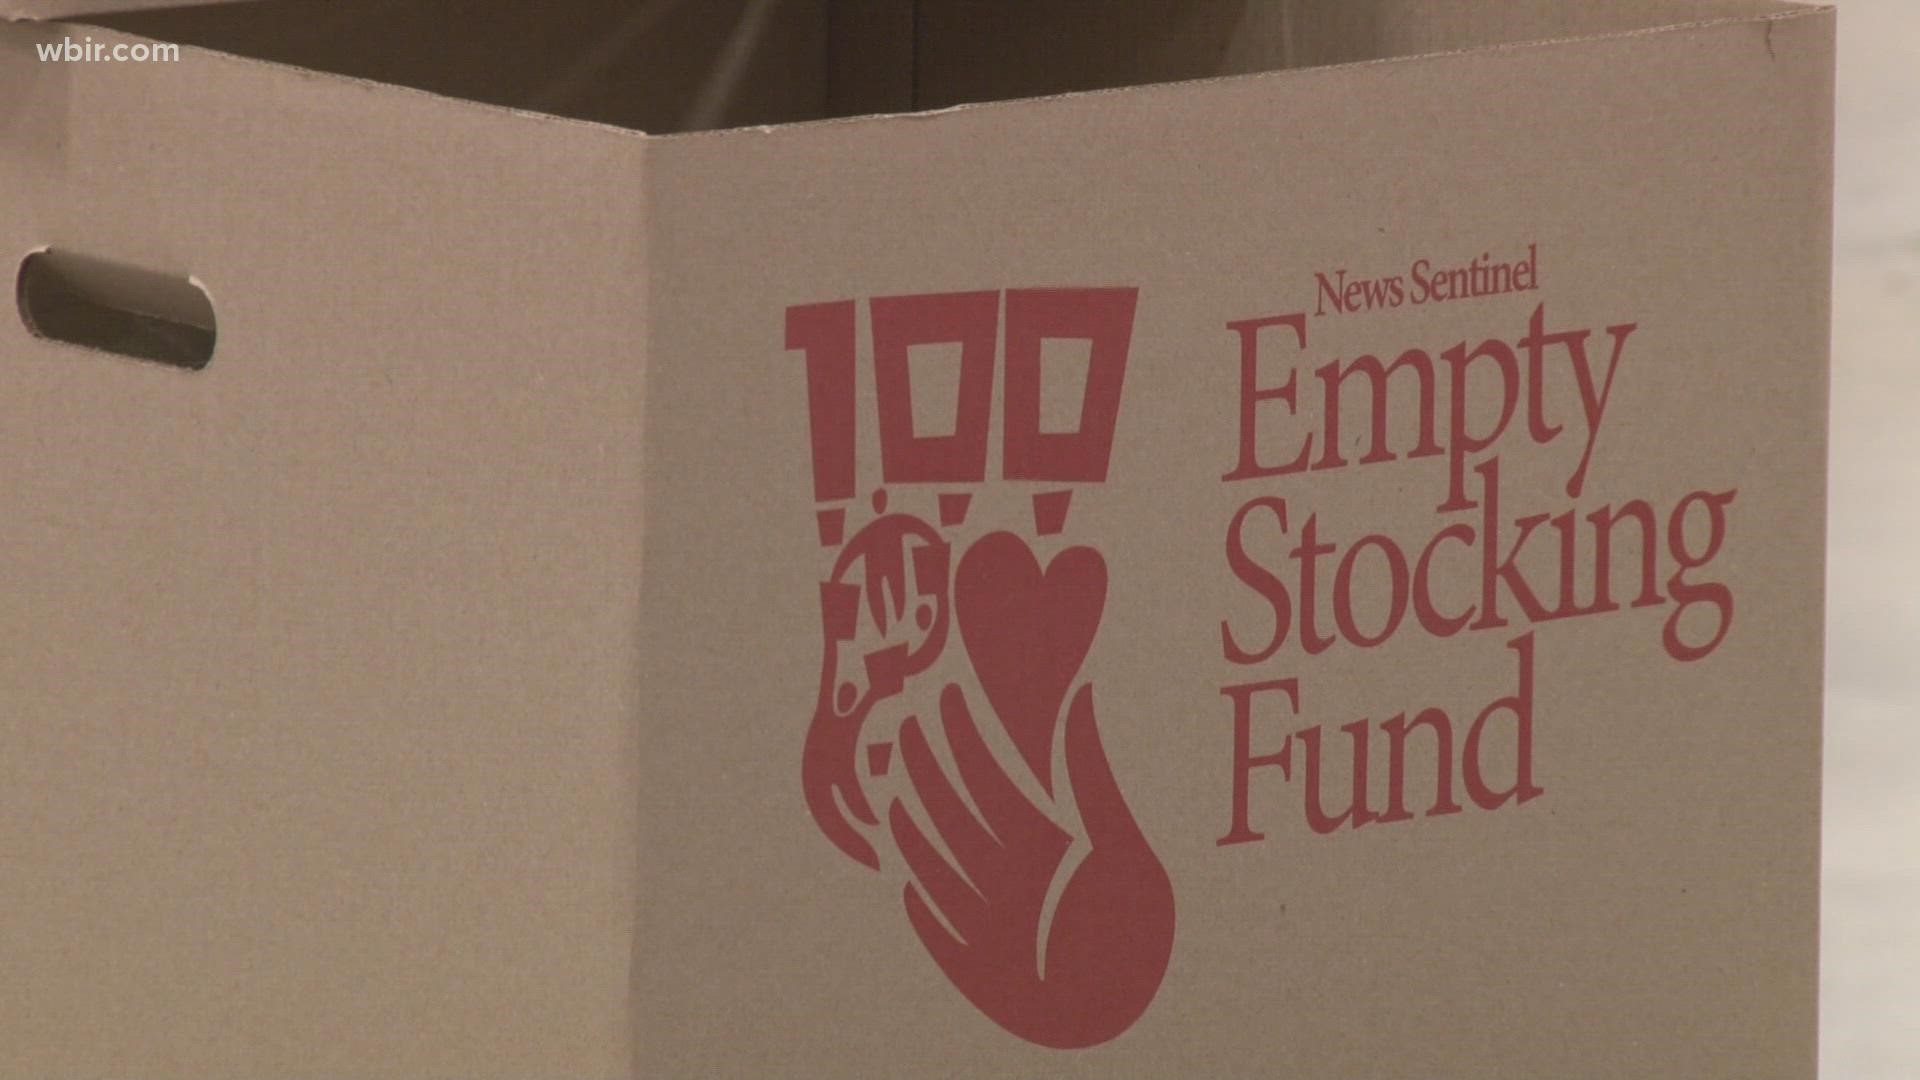 Organizers with the Empty Stocking Fund said that they are working to make sure no family goes unfed over the holiday season.